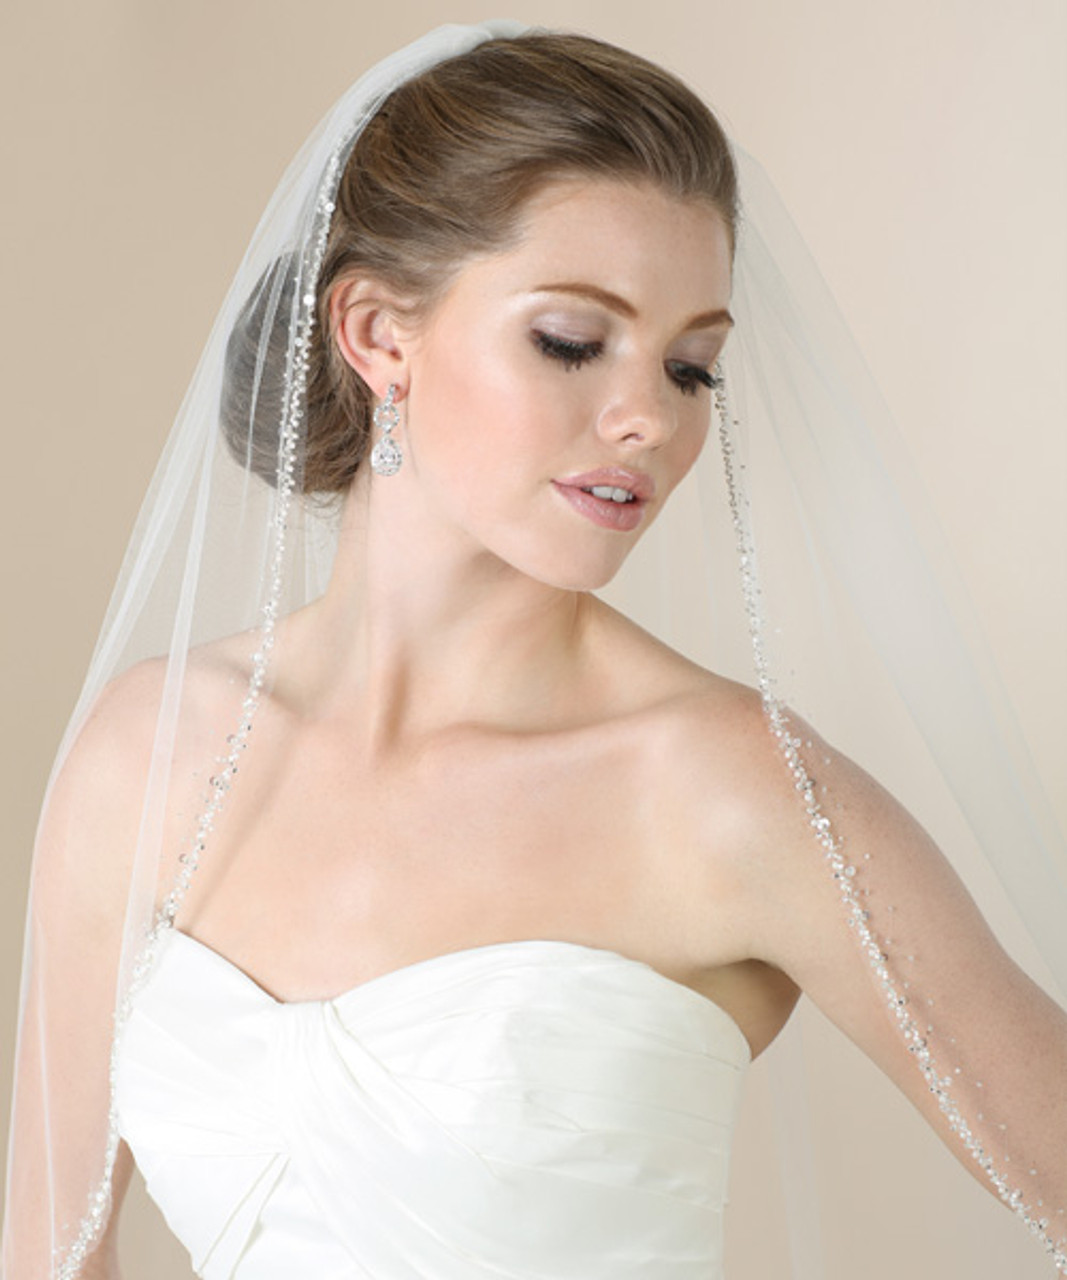 Glitter Veil With Rhinestone Edging Sparkly Veil With Blusher